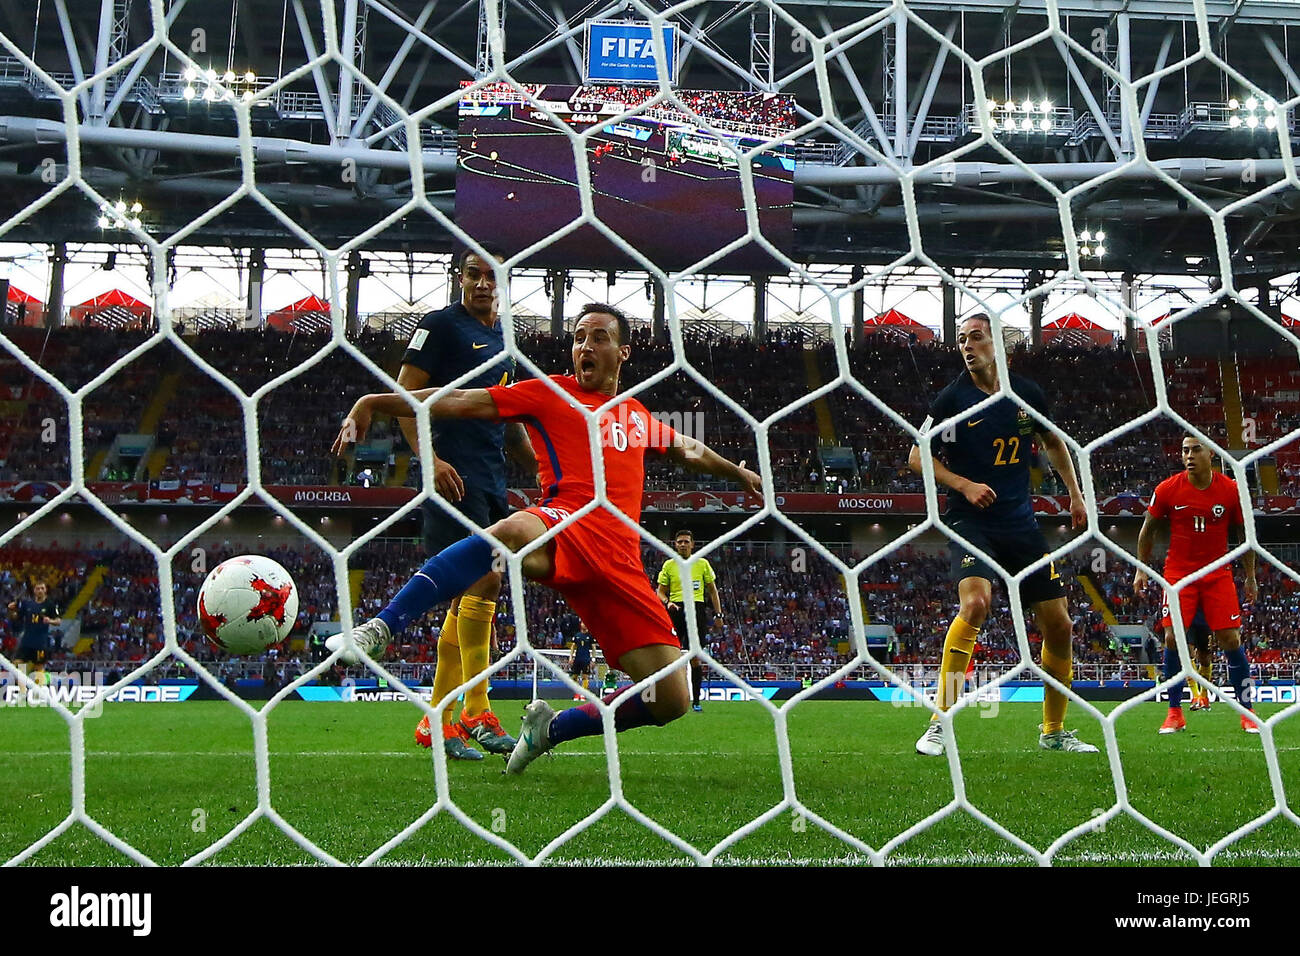 Moscow, Russia. 25th Jun, 2017. Jose Fuenzalida of Chile is bidding with Tim Cahill of Australia during a match between Chile and Australia for the third round of the 2017 Confederations Cup on Sunday (25th), held at the Spartak Stadium in Moscow, Russia. Credit: Foto Arena LTDA/Alamy Live News Stock Photo